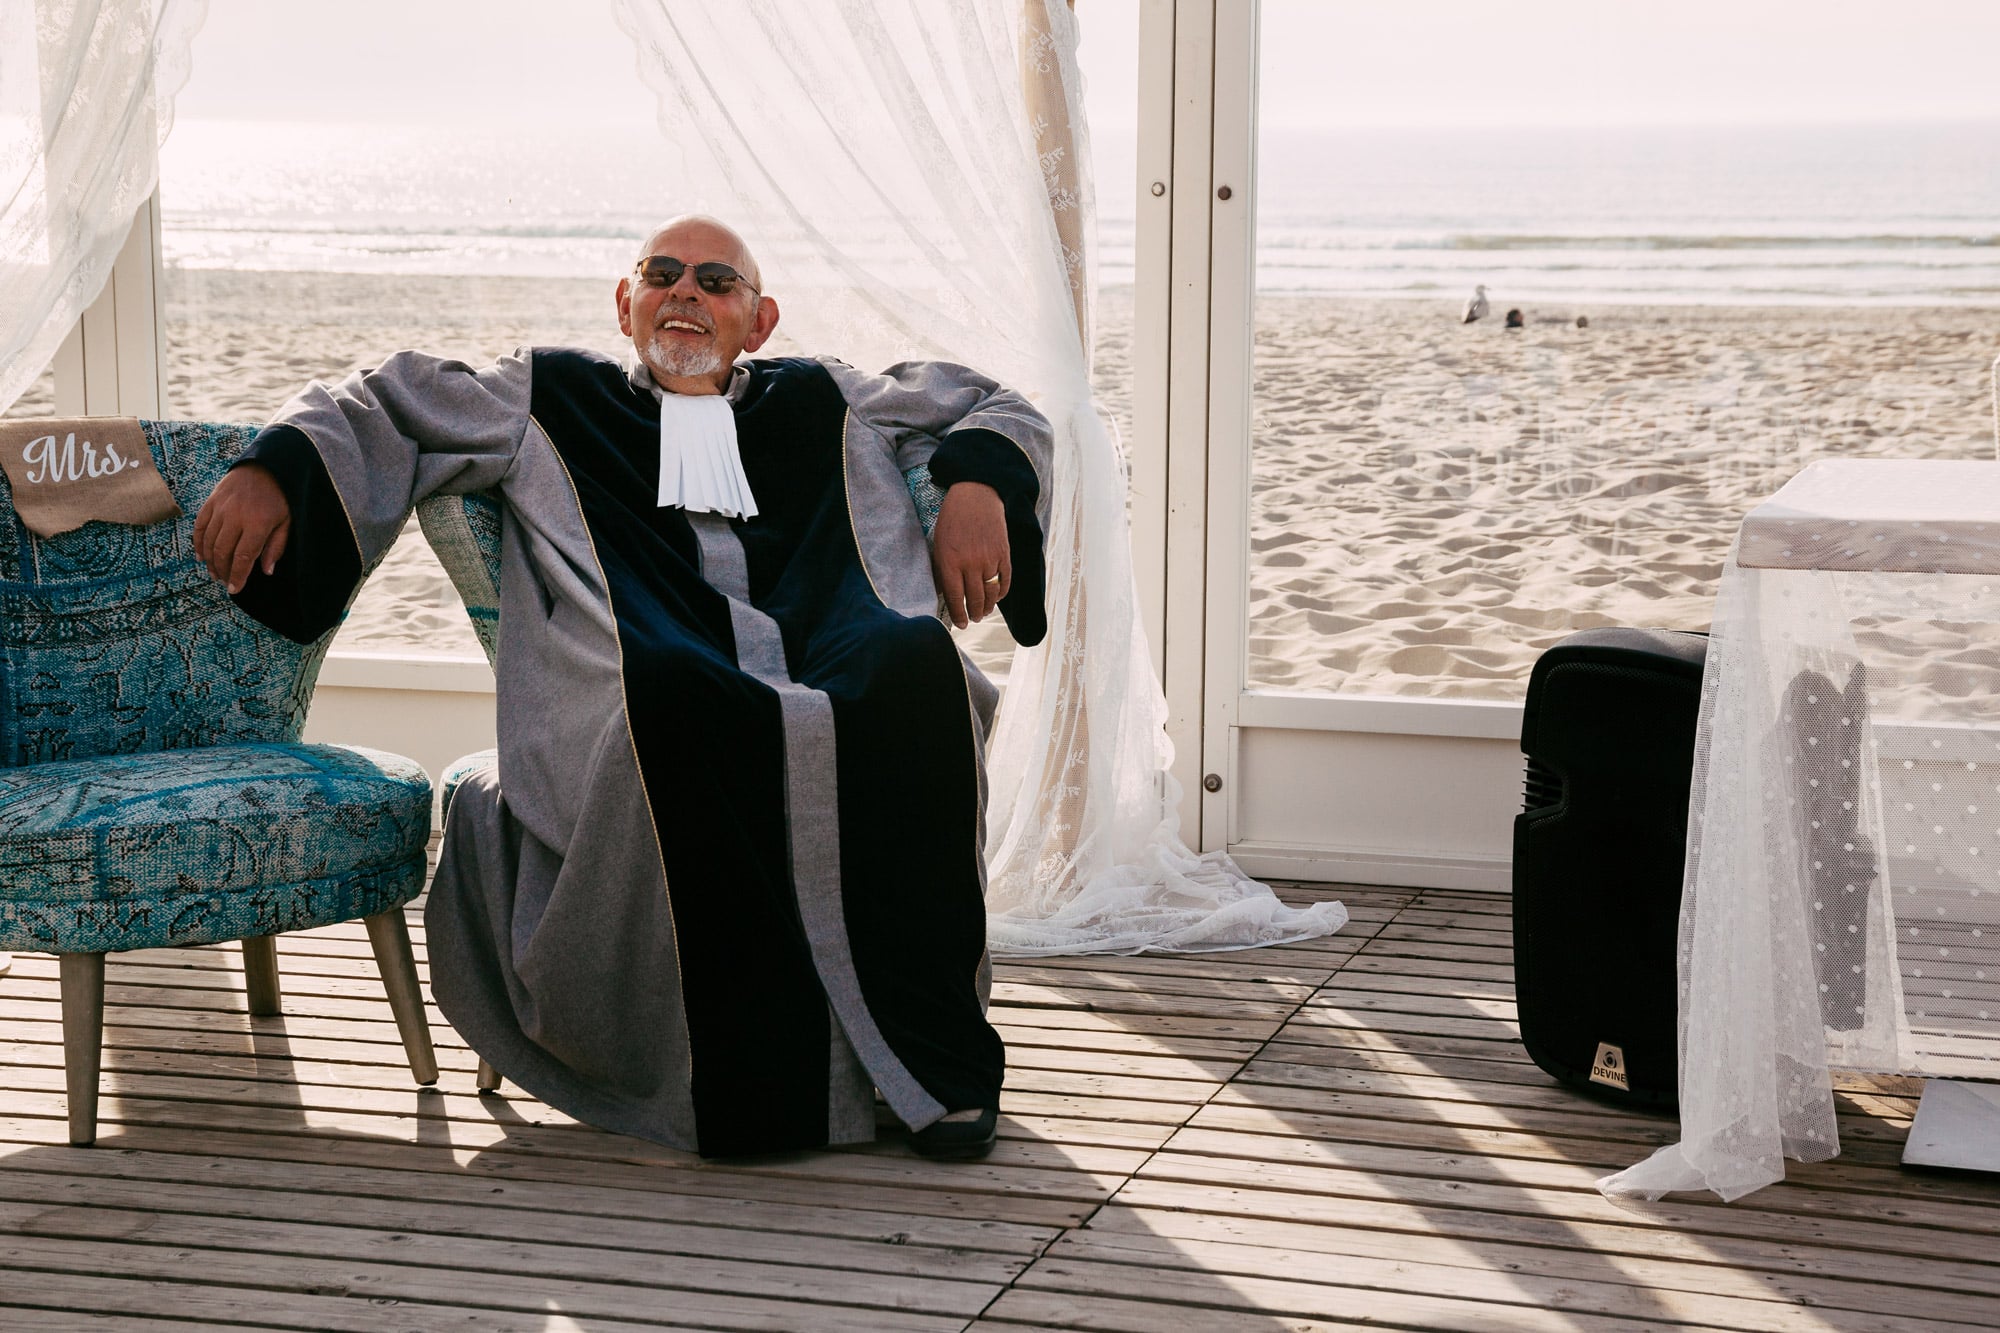     A man in a bathrobe sitting on a chair on the beach, enjoying the peaceful atmosphere and reflecting on the beauty of nature.